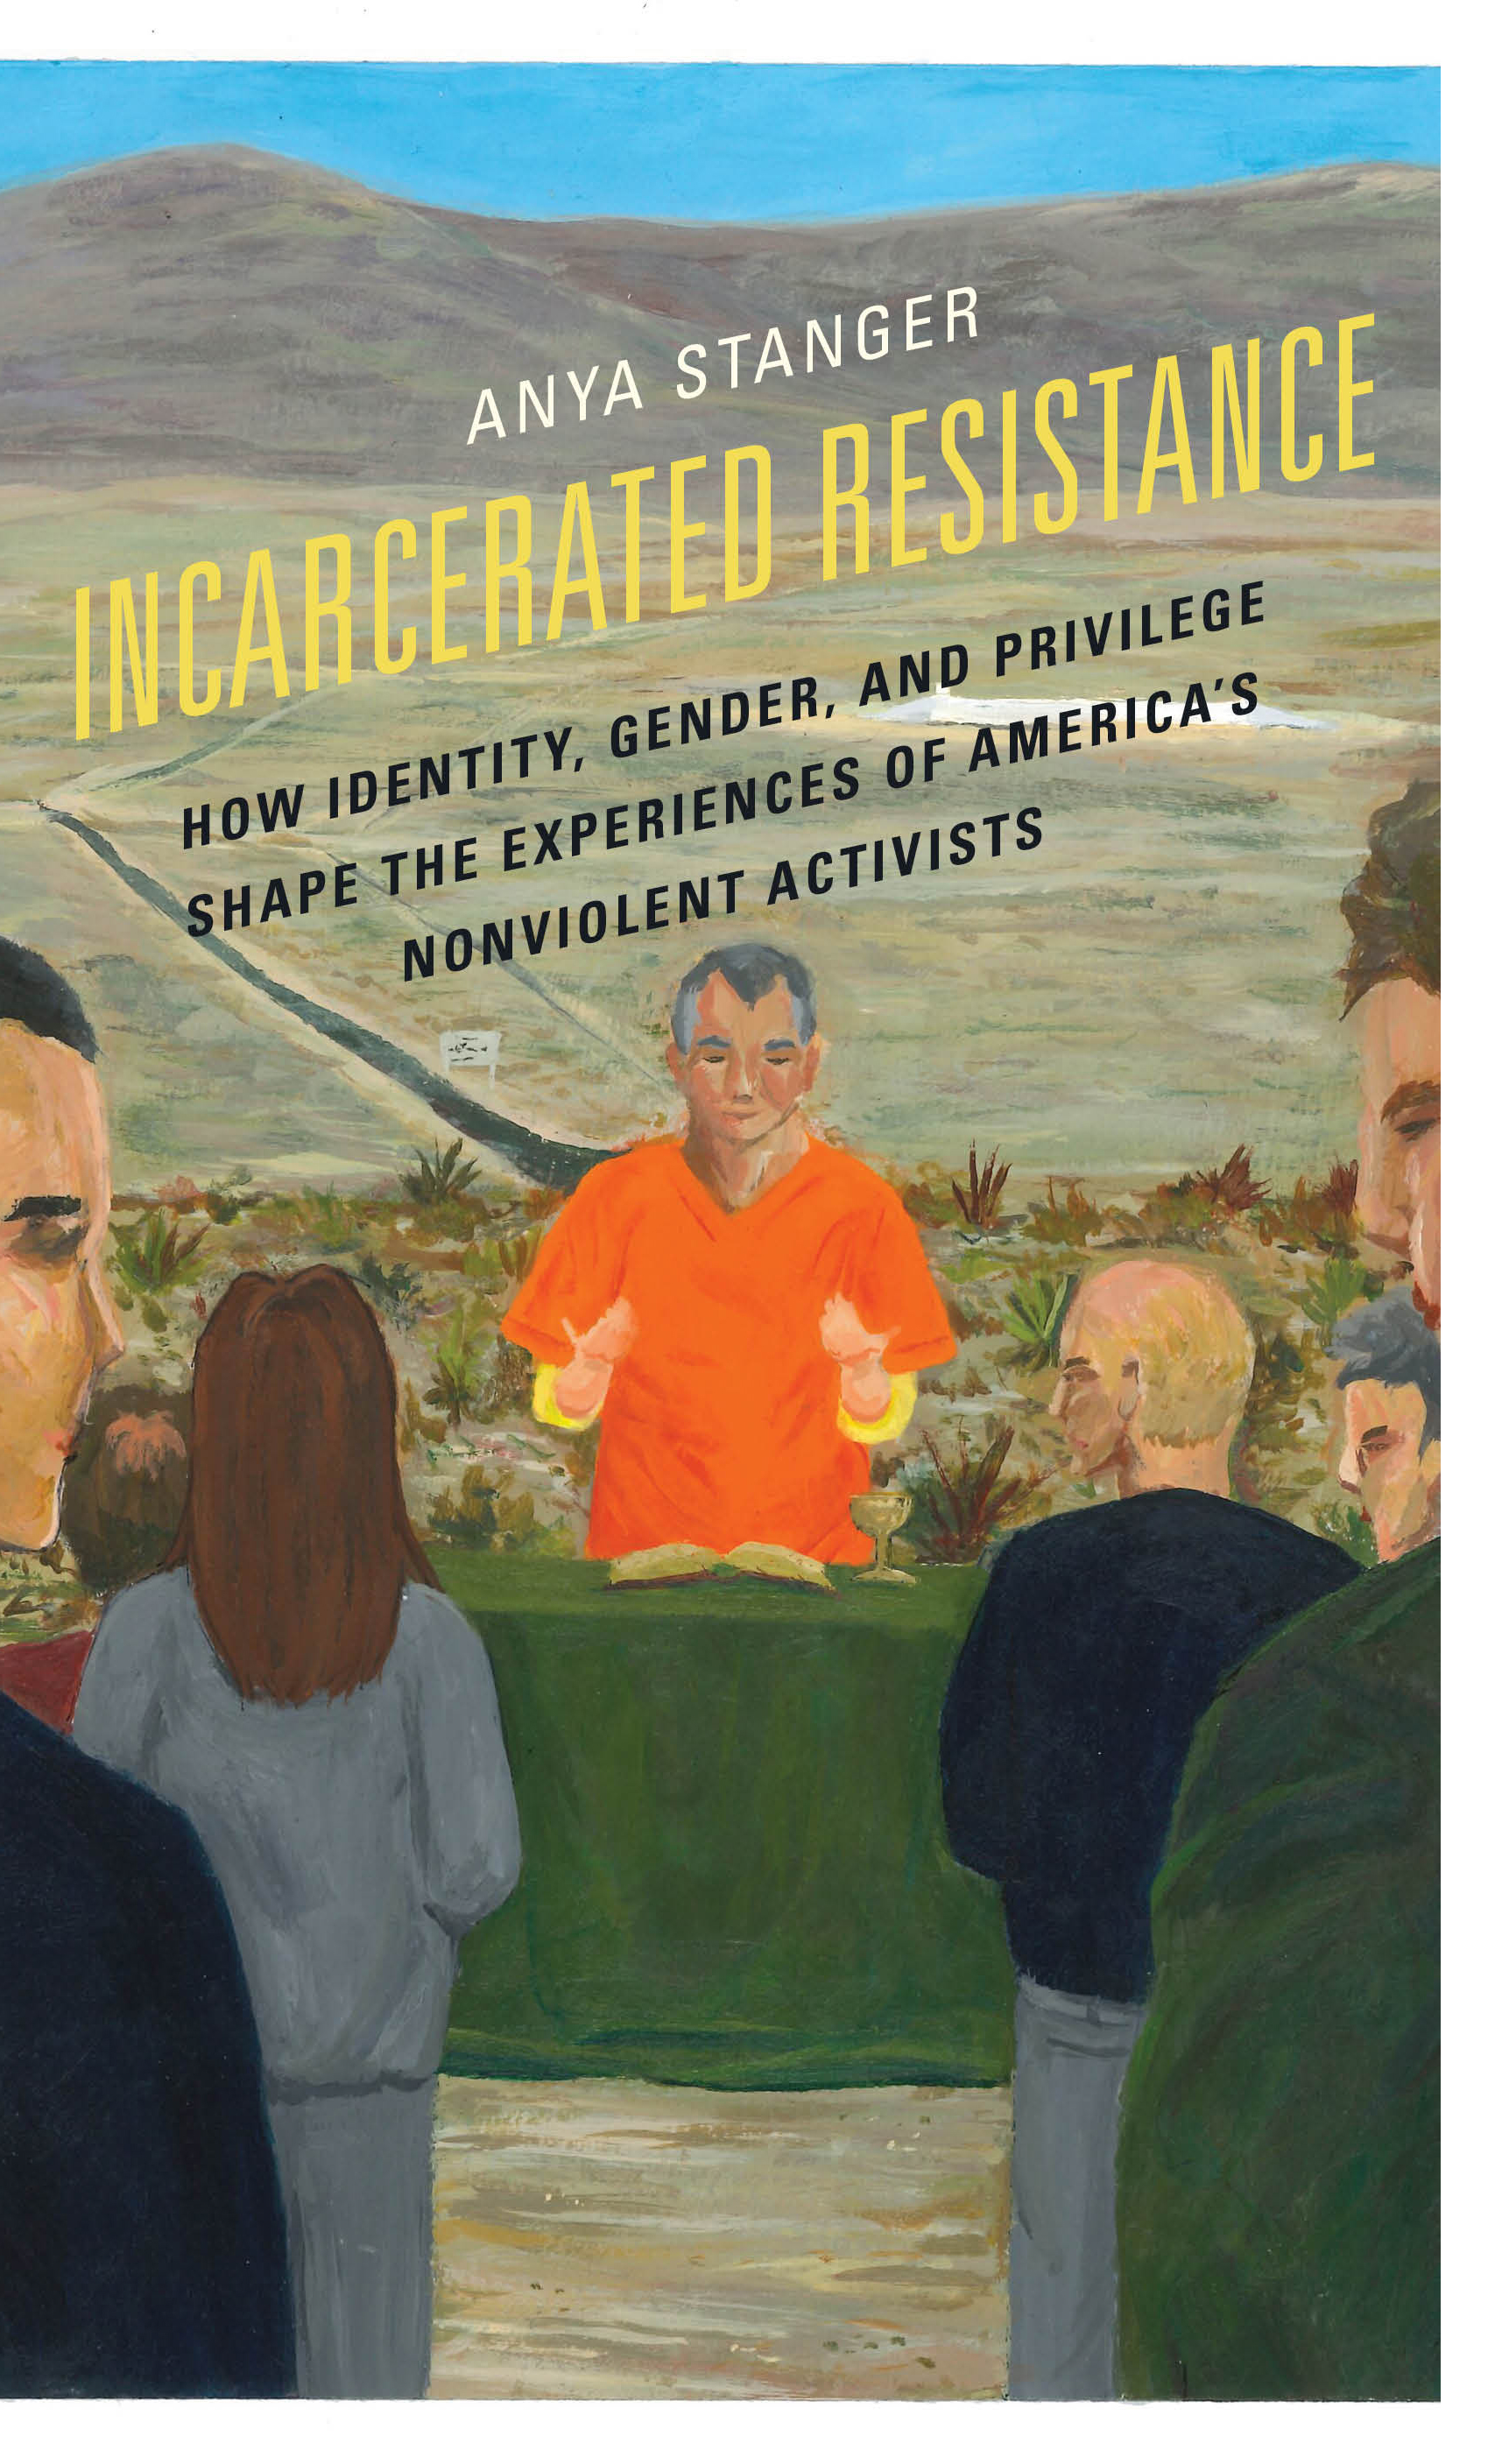 Incarcerated Resistance: How Identity, Gender, and Privilege Shape the Experiences of America's Nonviolent Activists